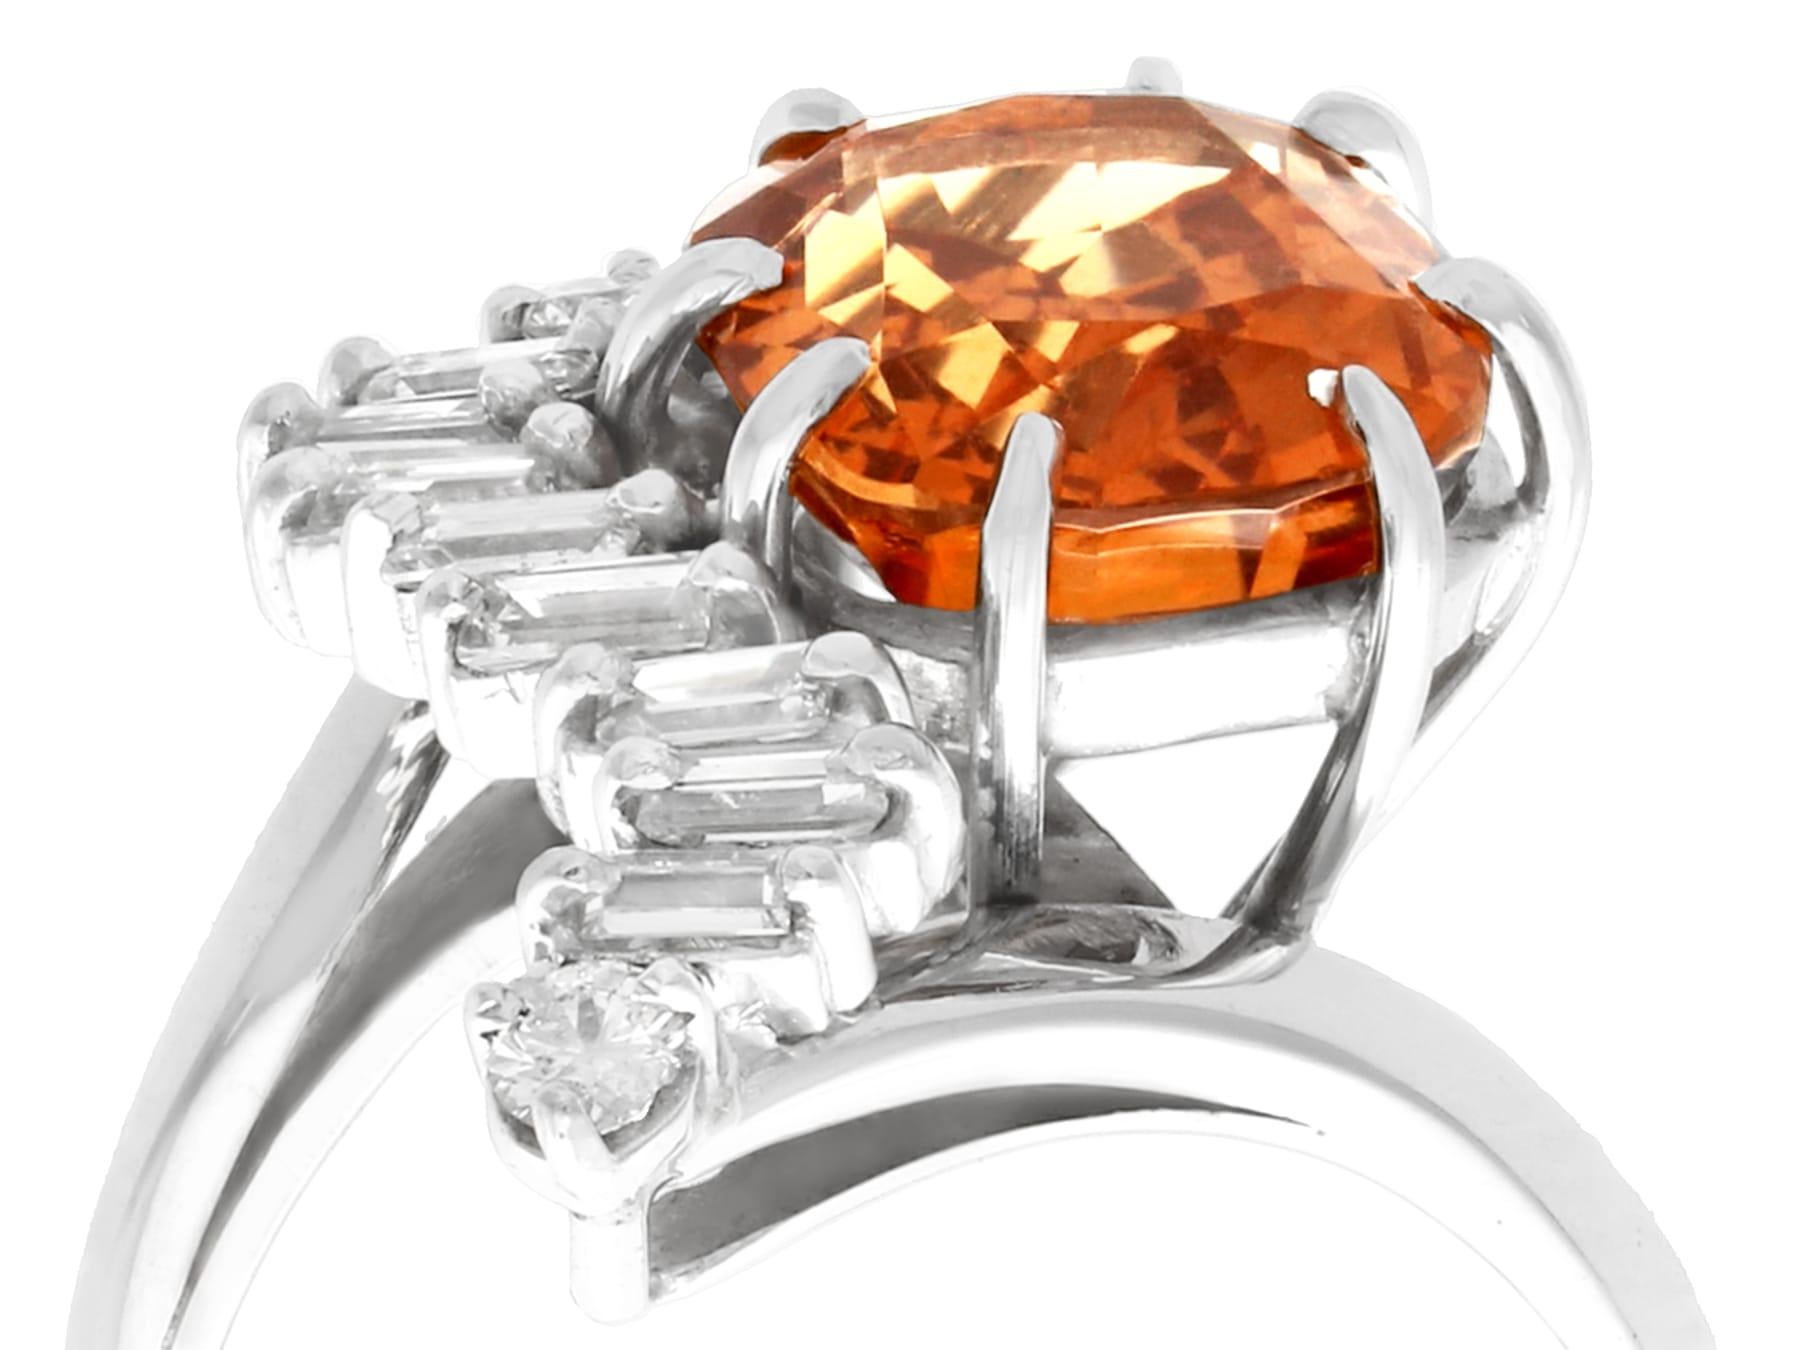 A stunning, fine and impressive 5.29 carat hessonite garnet and 0.52 carat diamond, 18 karat white gold twist style dress ring; part of our diverse gemstone jewelry collections.

This stunning, fine and impressive gemstone ring has been crafted in